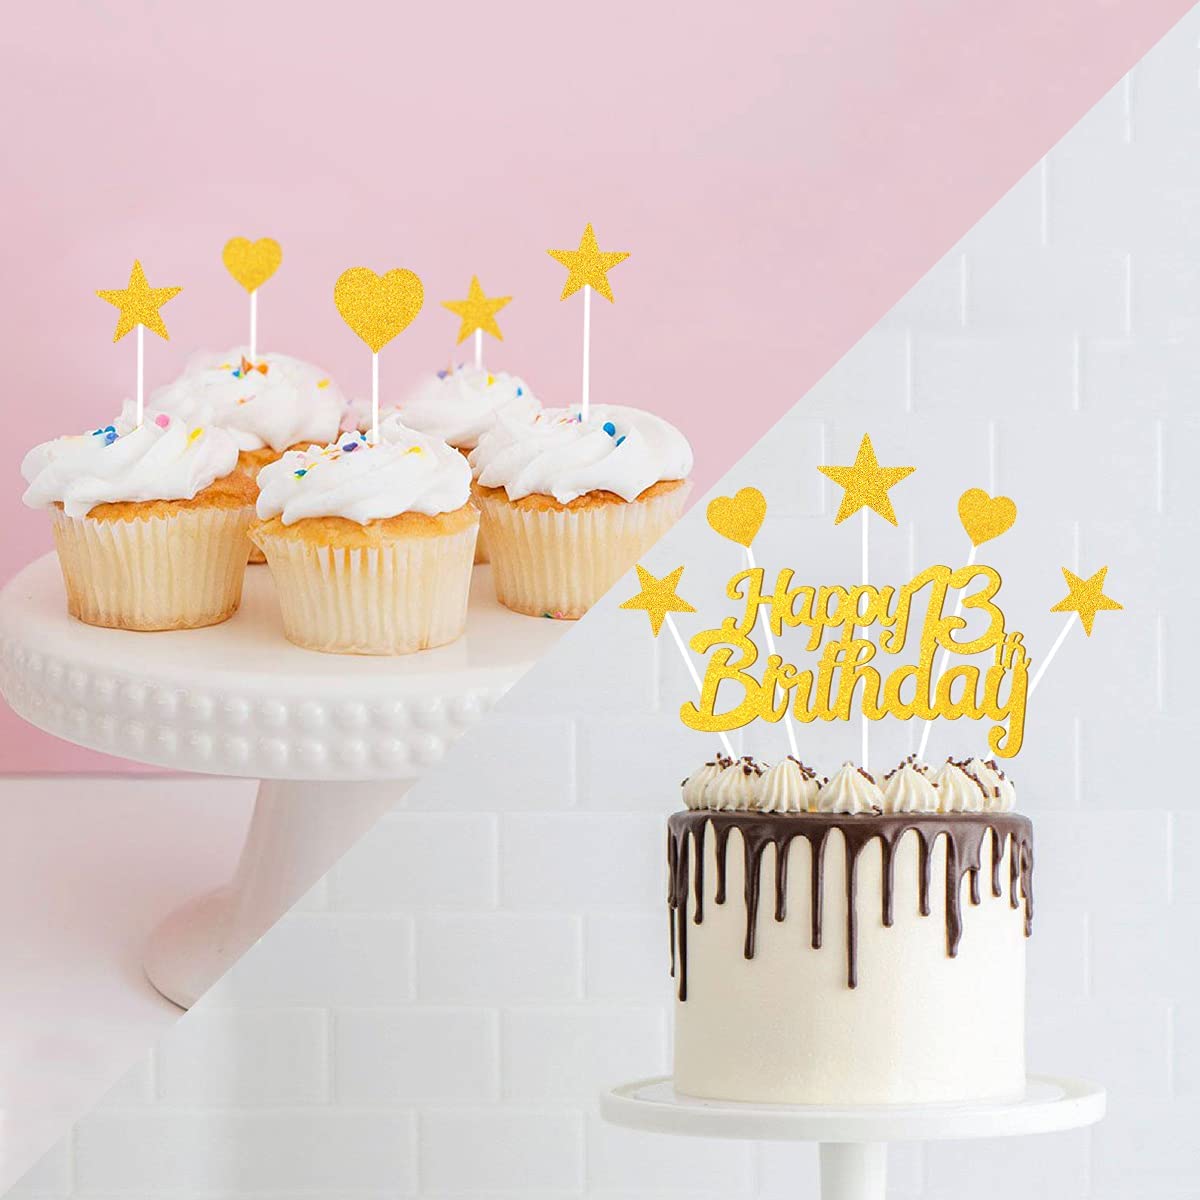 Humairc 13th Cake Toppers Boy, 13th Cake Decorations Girl, Gold Happy Birthday Cupcake Topper Star Heart Topper for Birthday Party Decor - 13 Years Old Birthday Cake Ideas - Men Women